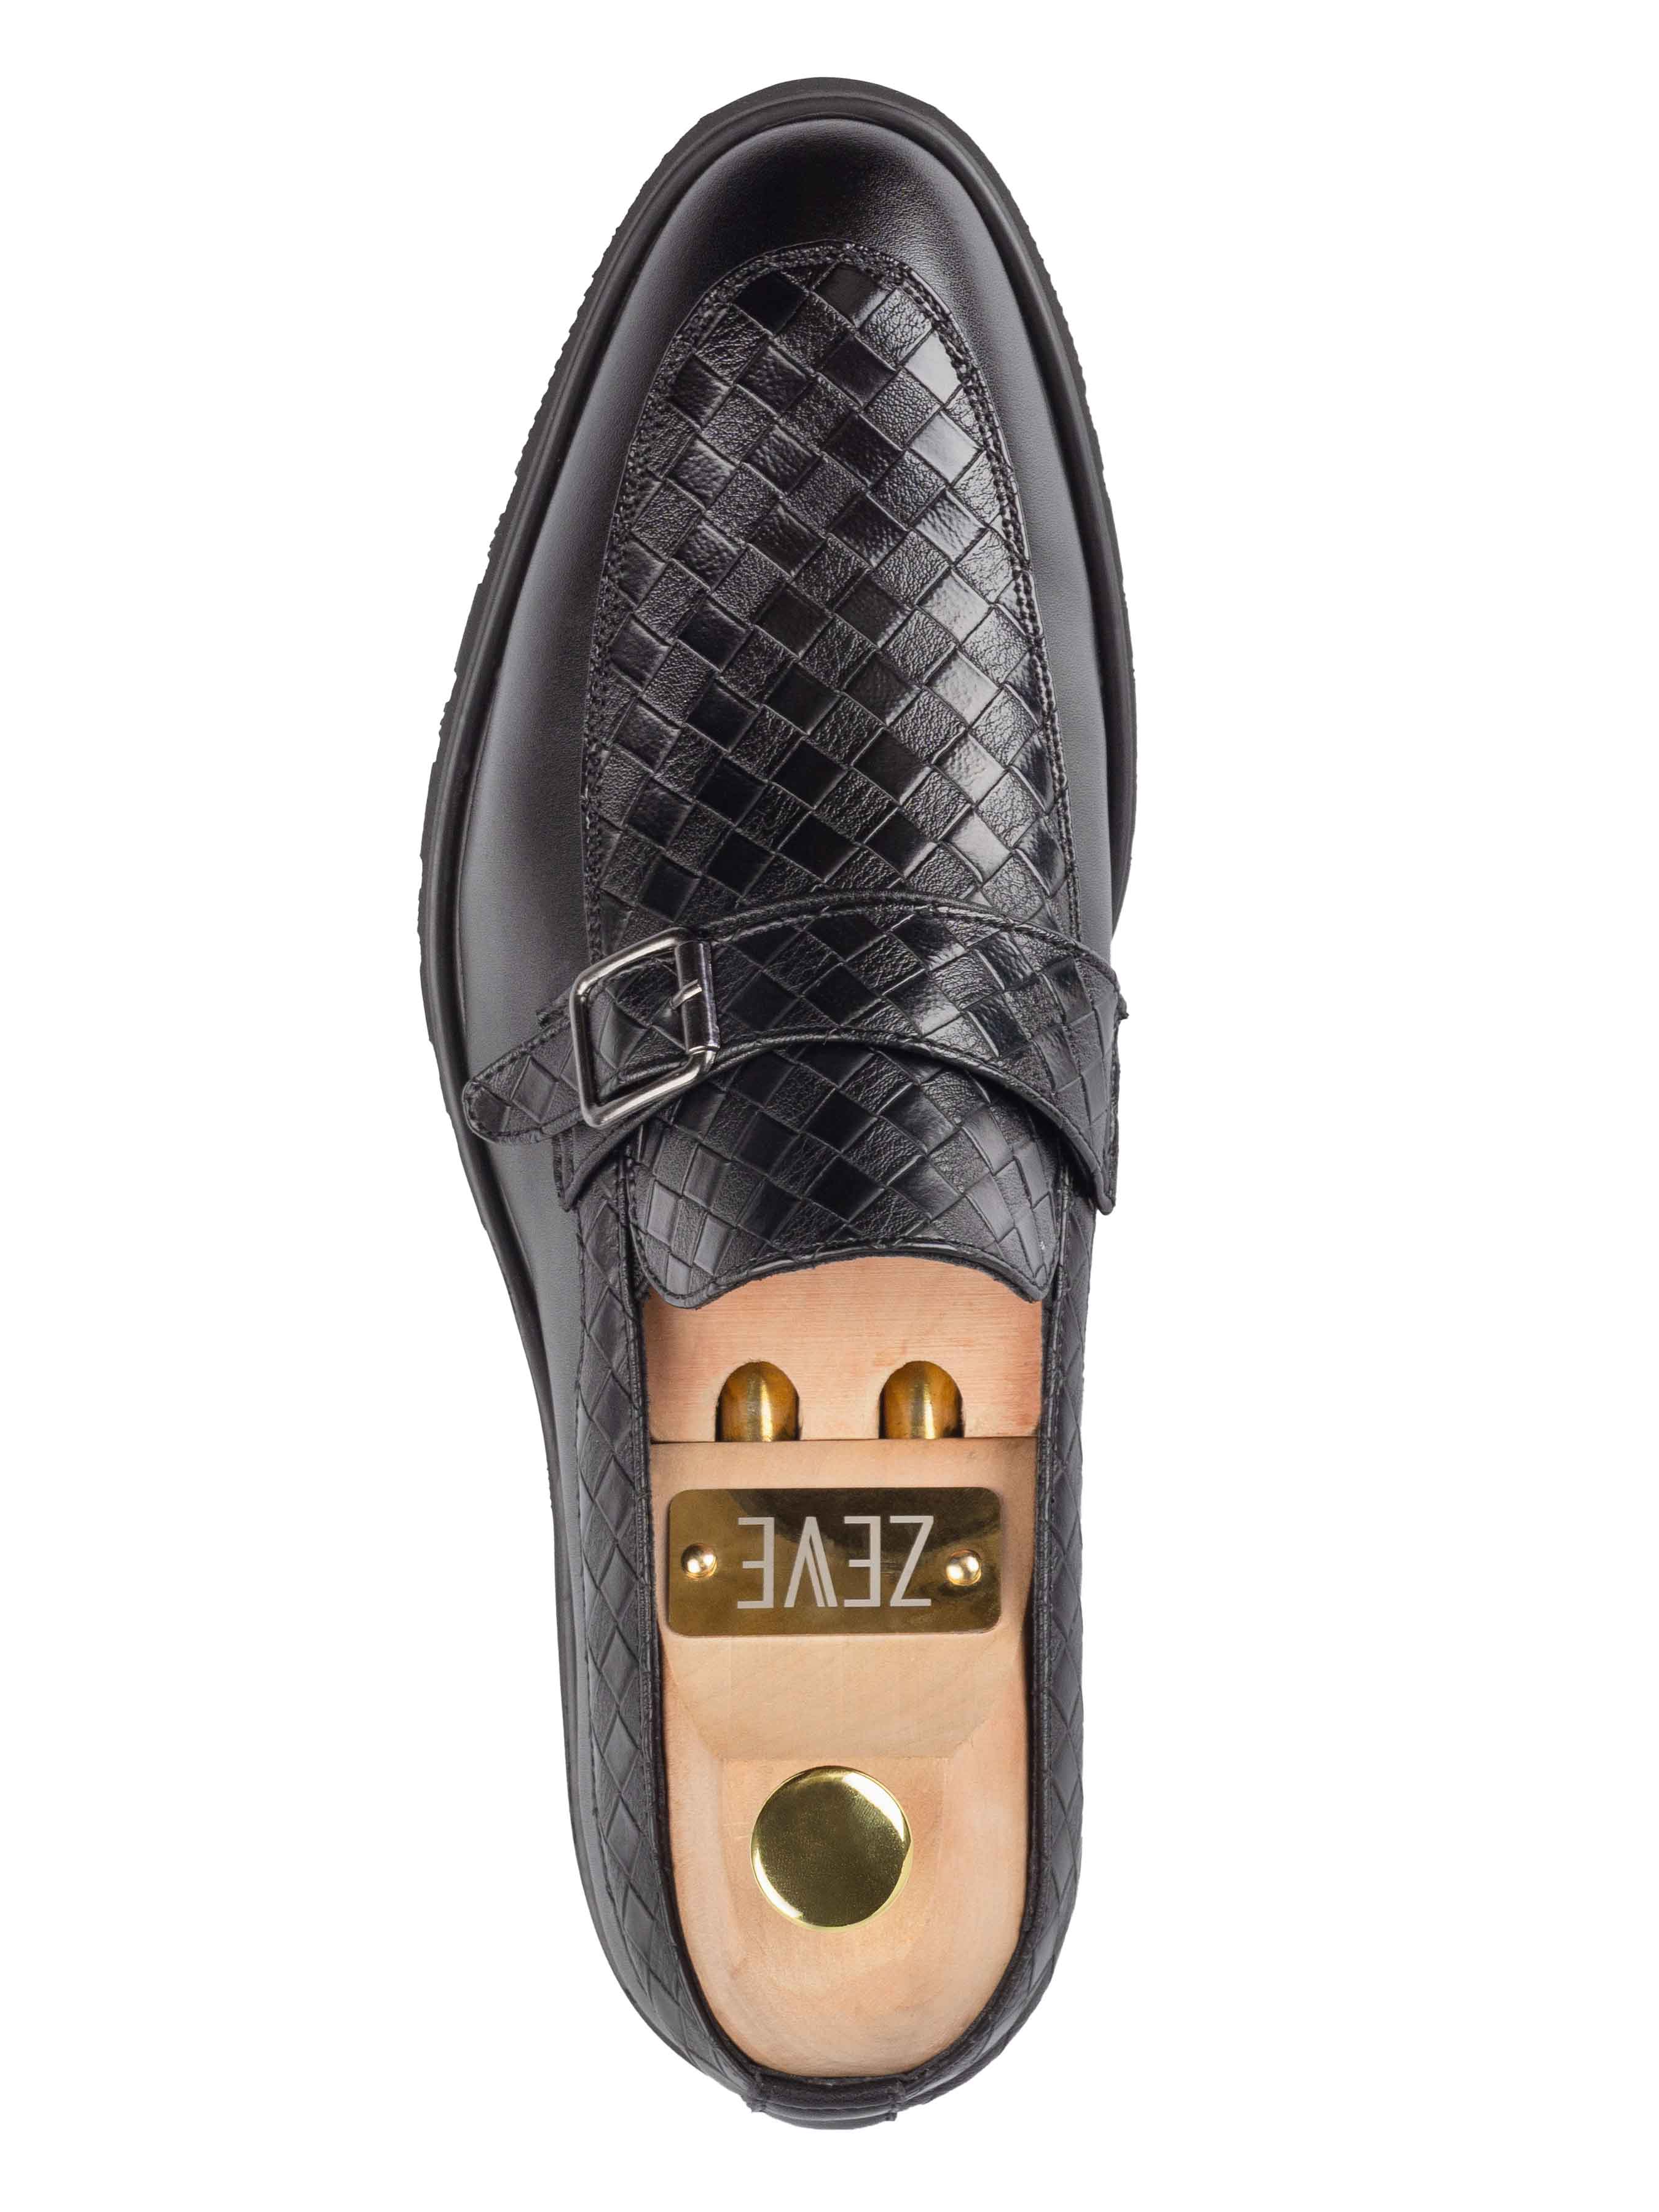 Oliver Single Strap Monk Loafer - Black Woven Leather (Flexi-Sole)